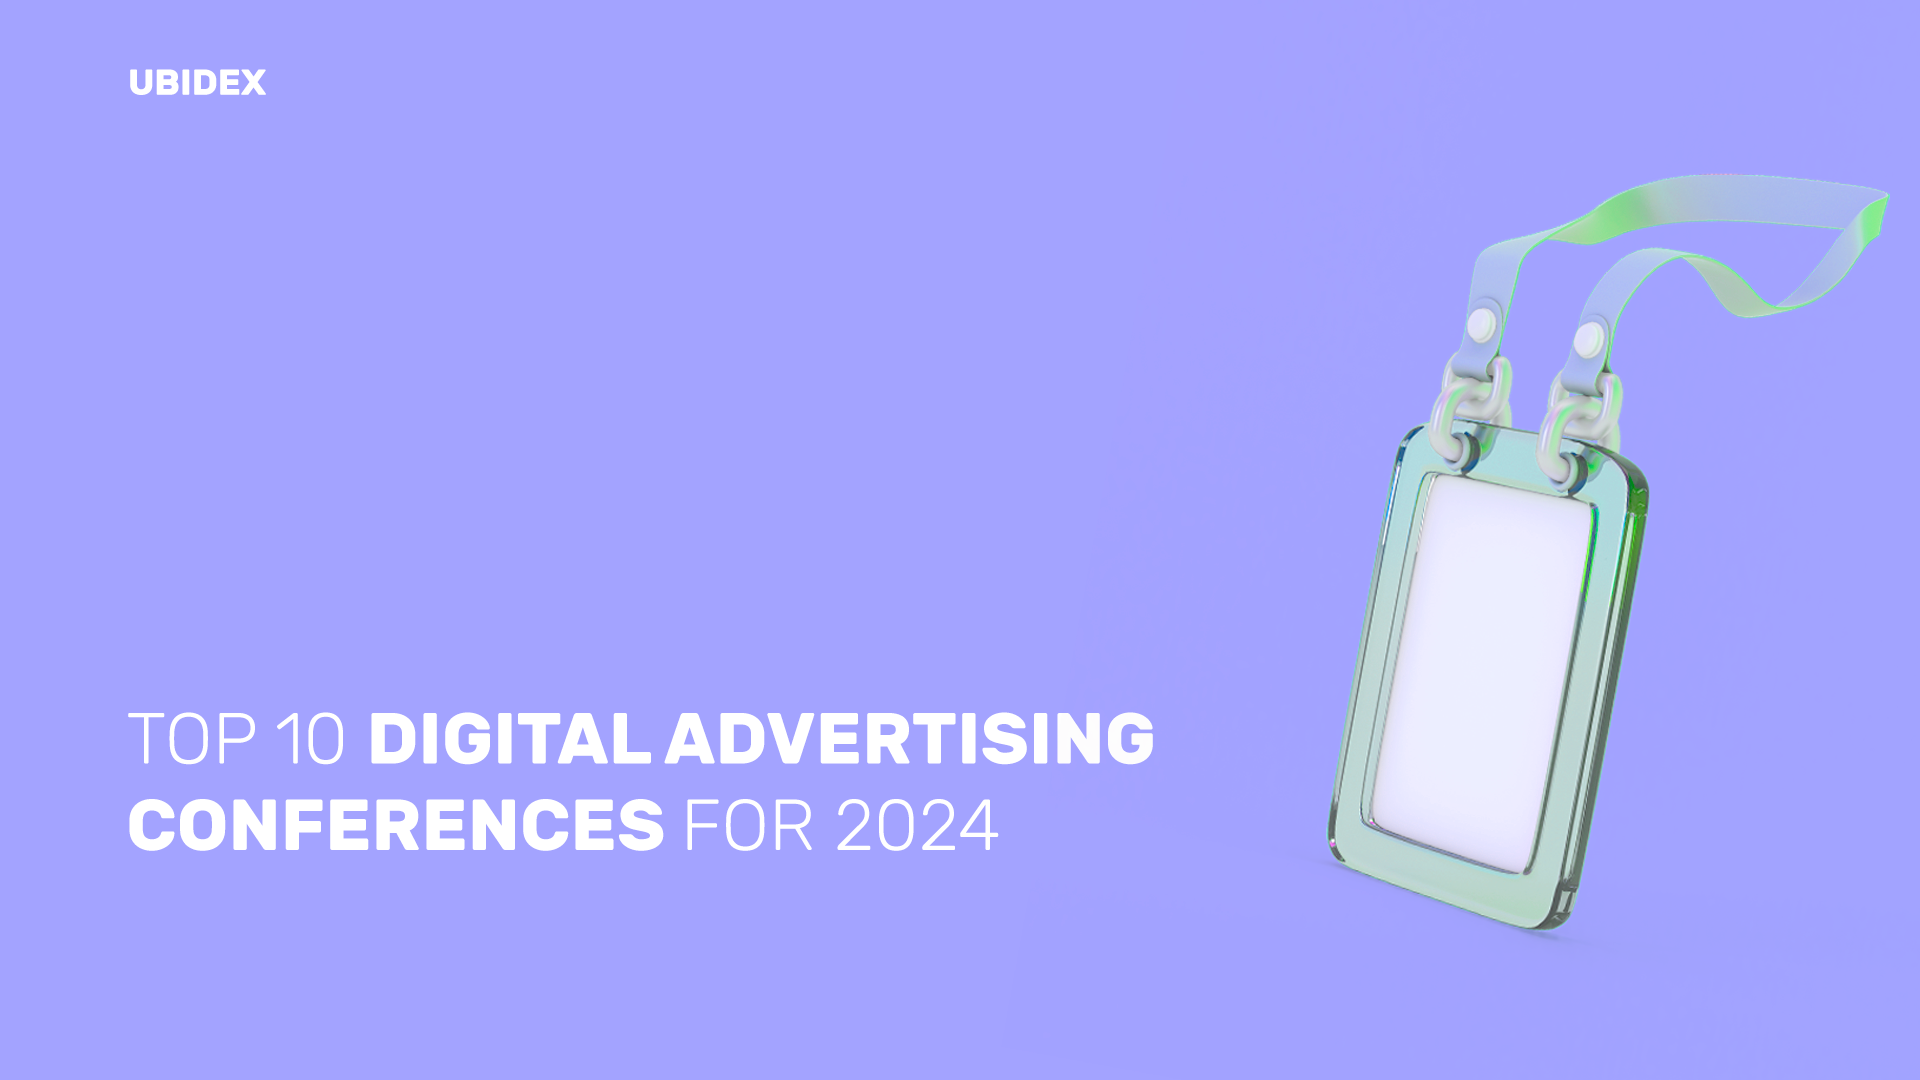 Top 10 Digital Advertising Conferences for 2024